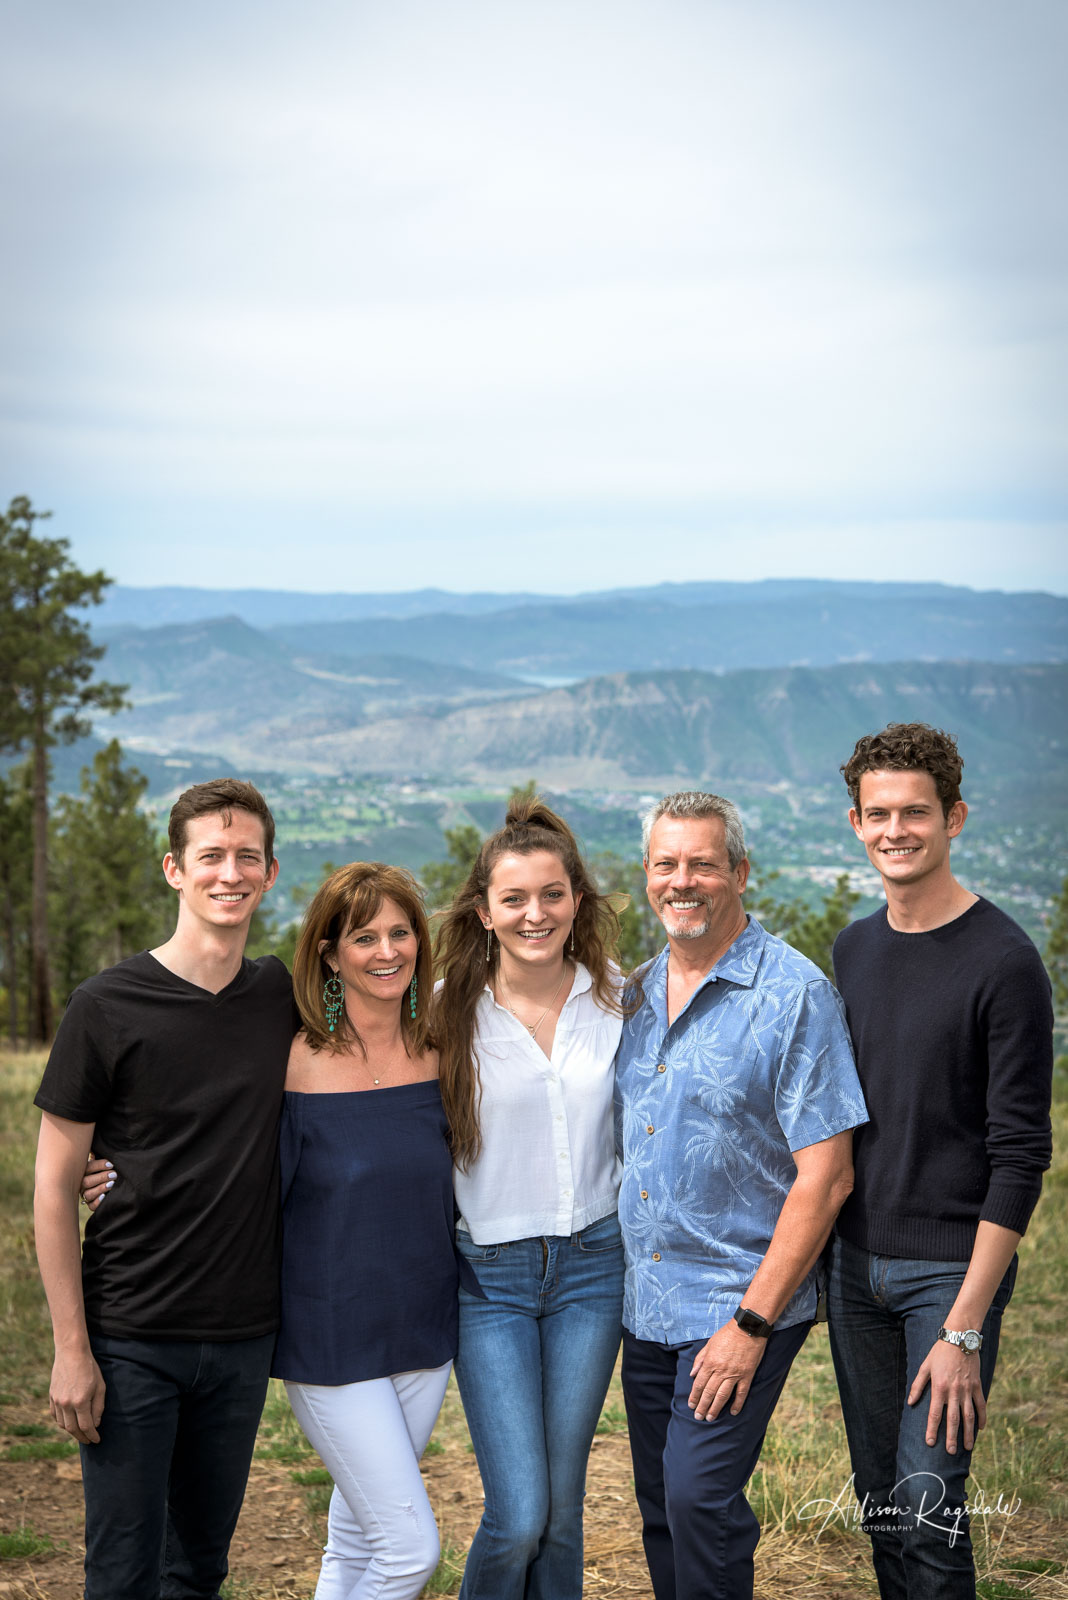 Family portraits by Allison Ragsdale Photography in Durango Colorado 